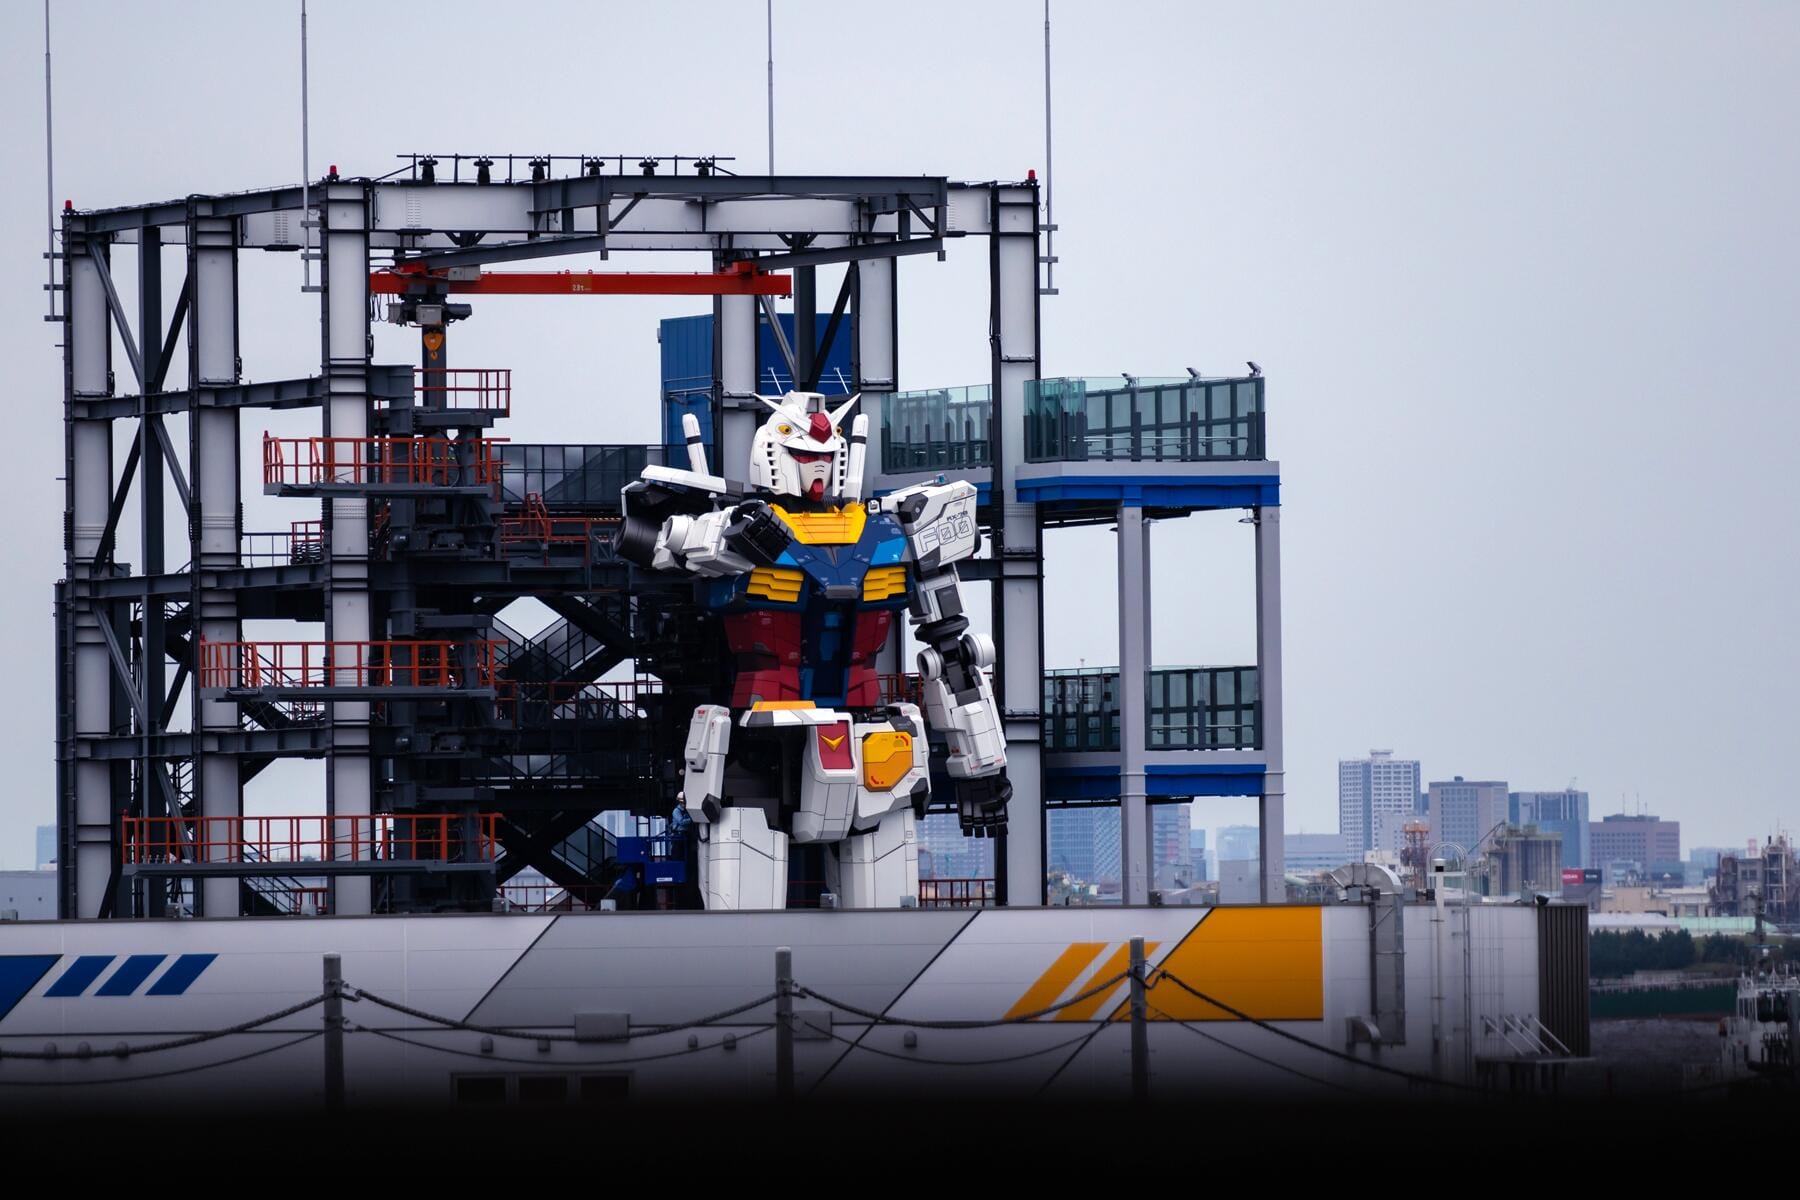 The Biggest New Reason To Travel To Japan Is a Giant Robot